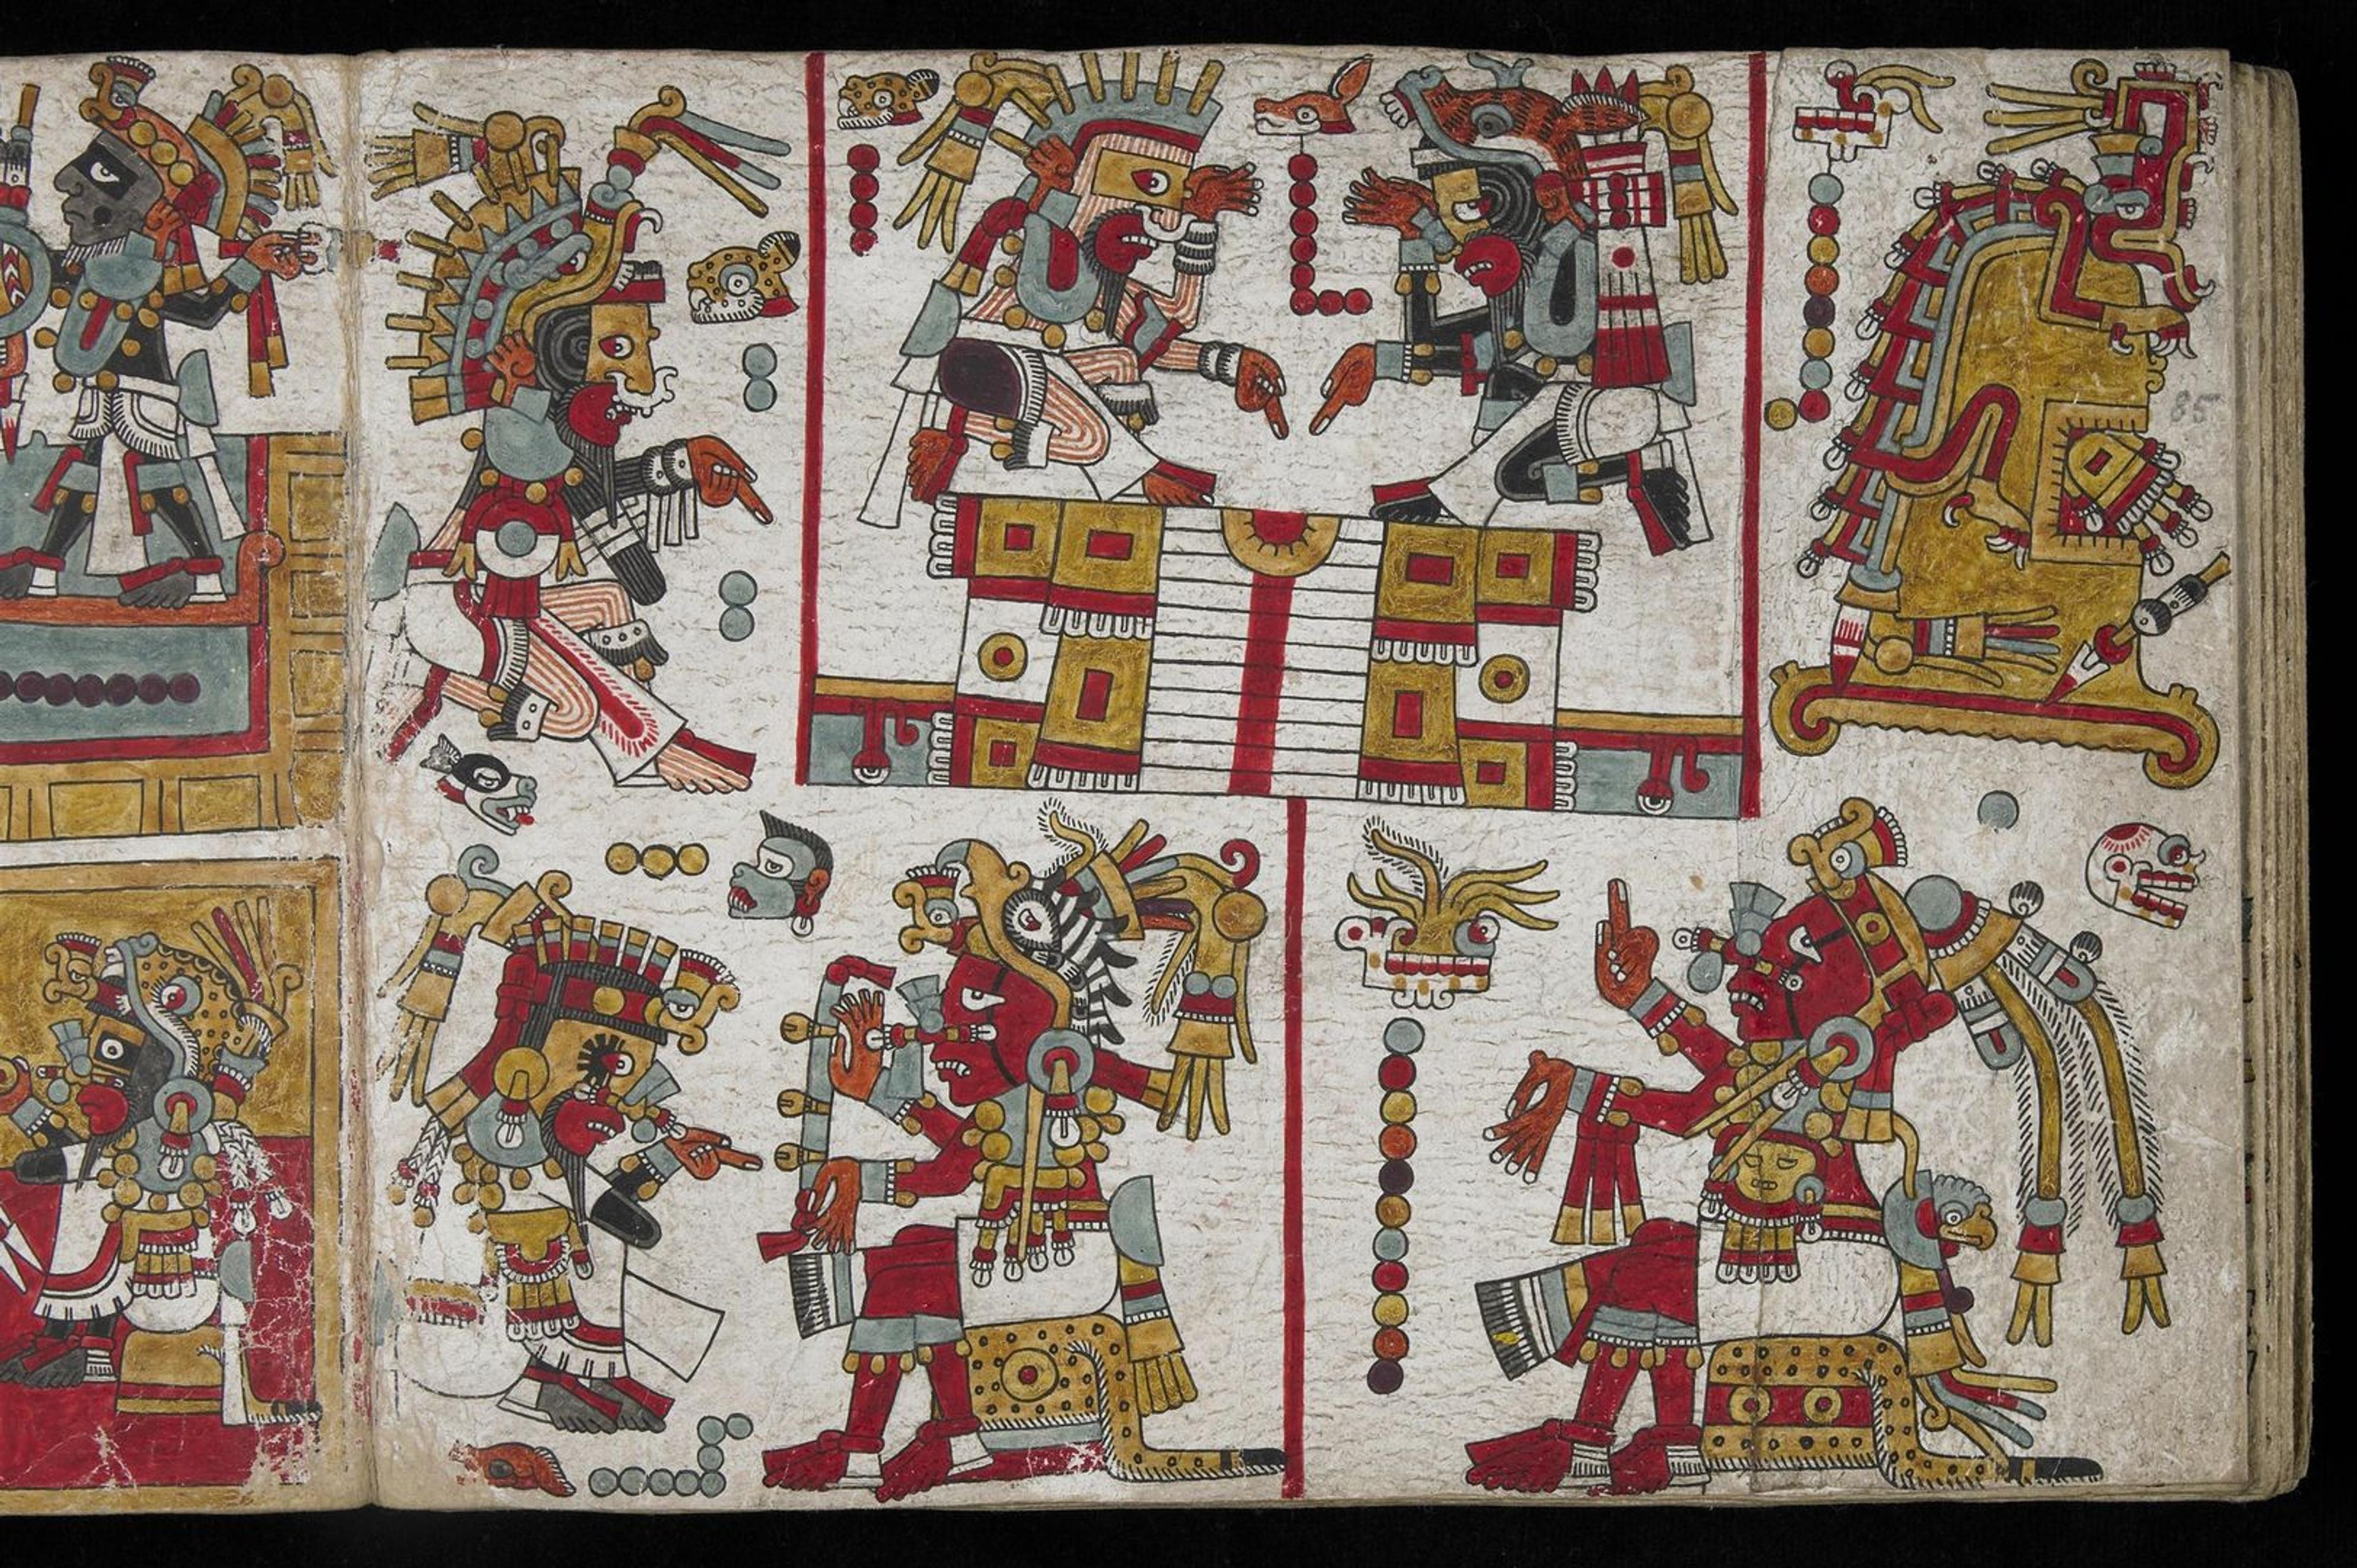 A page from the ancient Mexican tome Codex Zouche-Nuttall